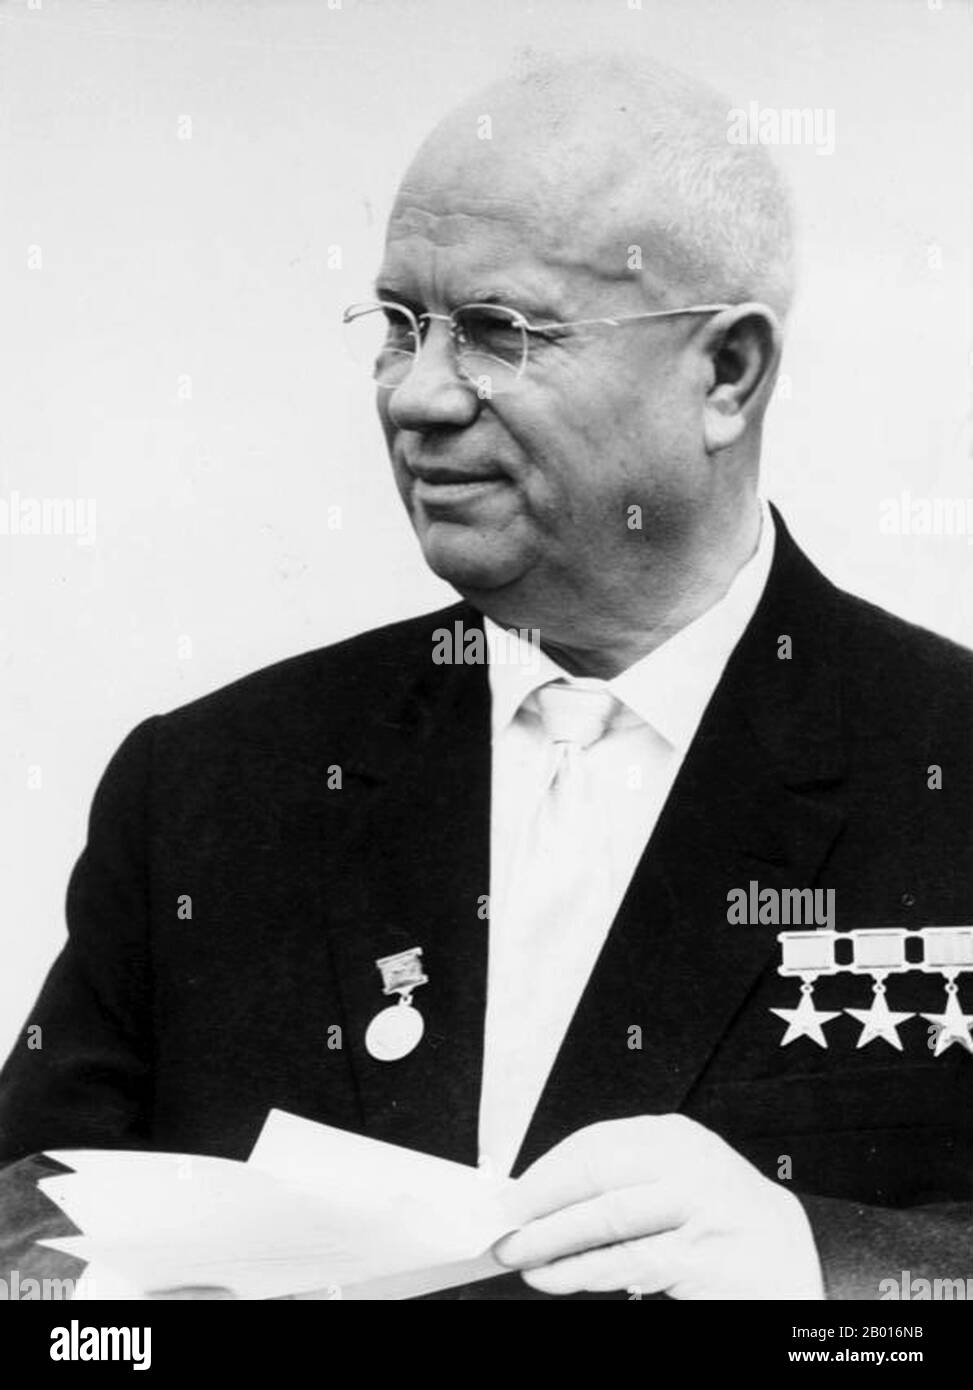 Soviet Union: Nikita Khrushchev (15 April 1894 - 11 September 1971), First Secretary of the Communist Party of the Soviet Union (r. 1953-1964), in East Berlin, June 1963. Photo by Bundesarchiv, Bild 183-B0628-0015-035 / Heinz Junge (CC BY-SA 3.0 License).  Nikita Sergeyevich Khrushchev led the Soviet Union during part of the Cold War. He served as First Secretary of the Communist Party of the Soviet Union from 1953 to 1964, and as Chairman of the Council of Ministers, or Premier, from 1958 to 1964. Khrushchev was responsible for the partial de-Stalinization of the Soviet Union. Stock Photo